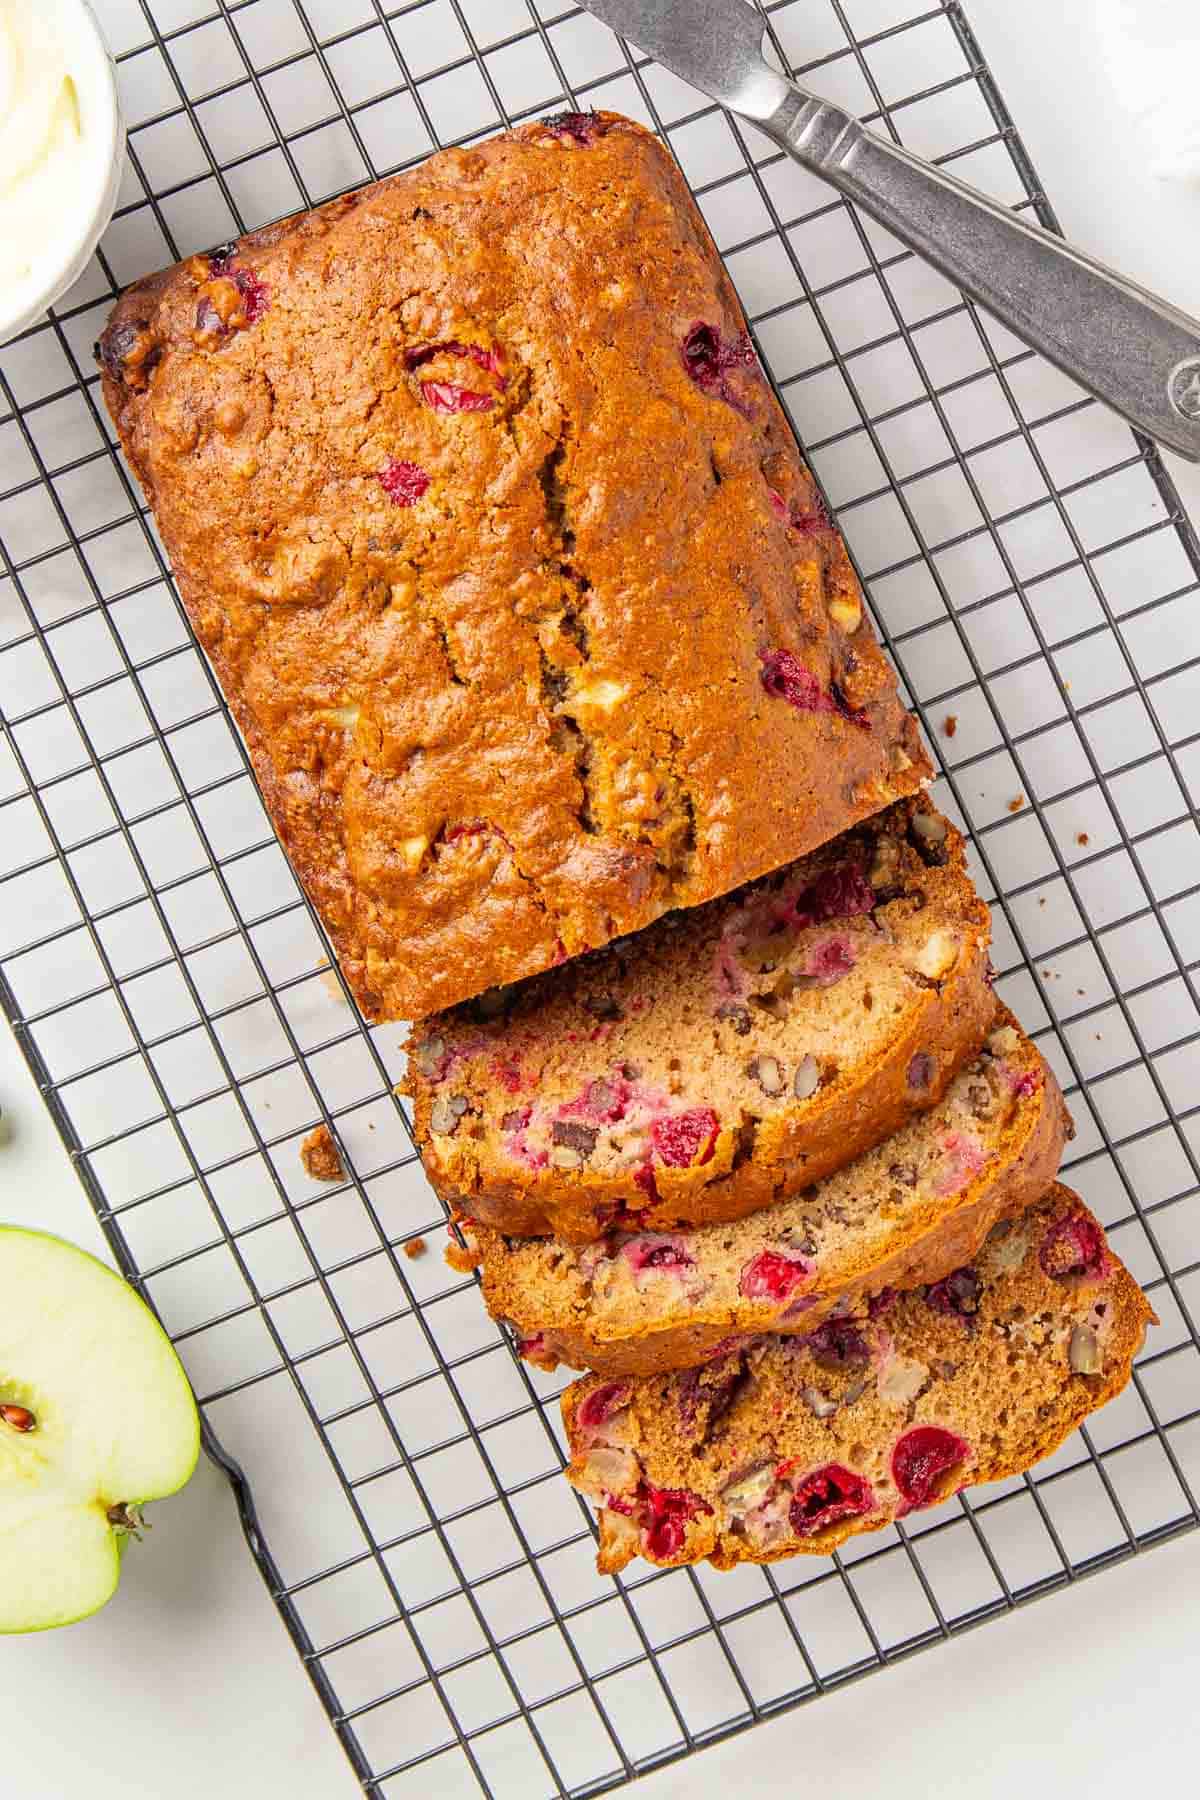 Overhead view of a partially sliced loaf of cranberry apple bread on a wire rack.